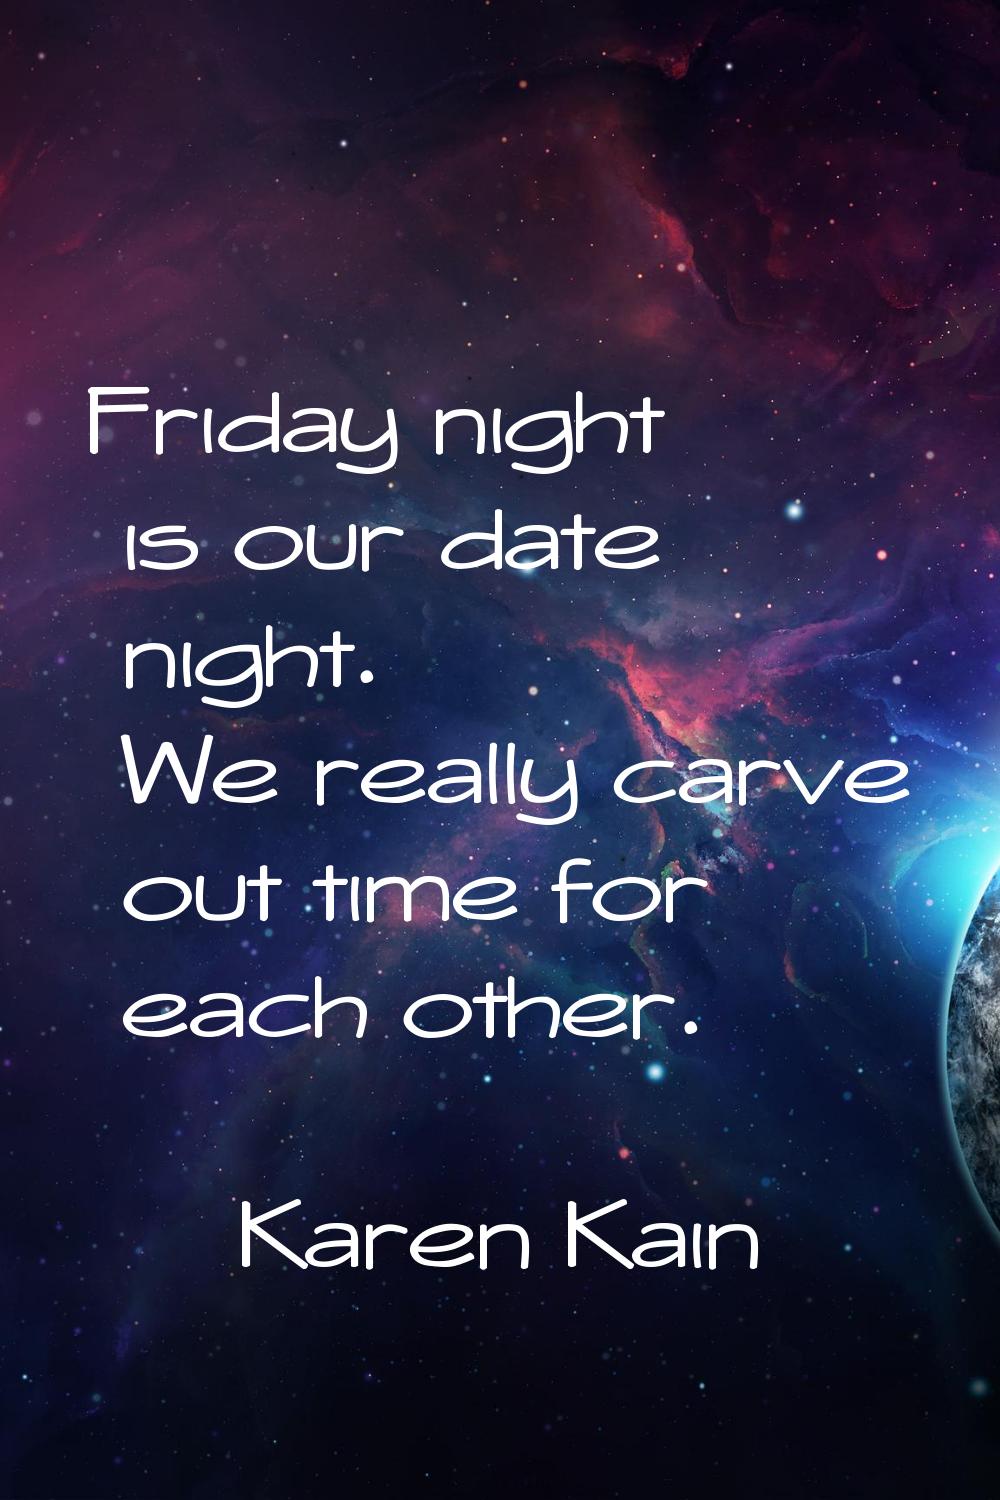 Friday night is our date night. We really carve out time for each other.